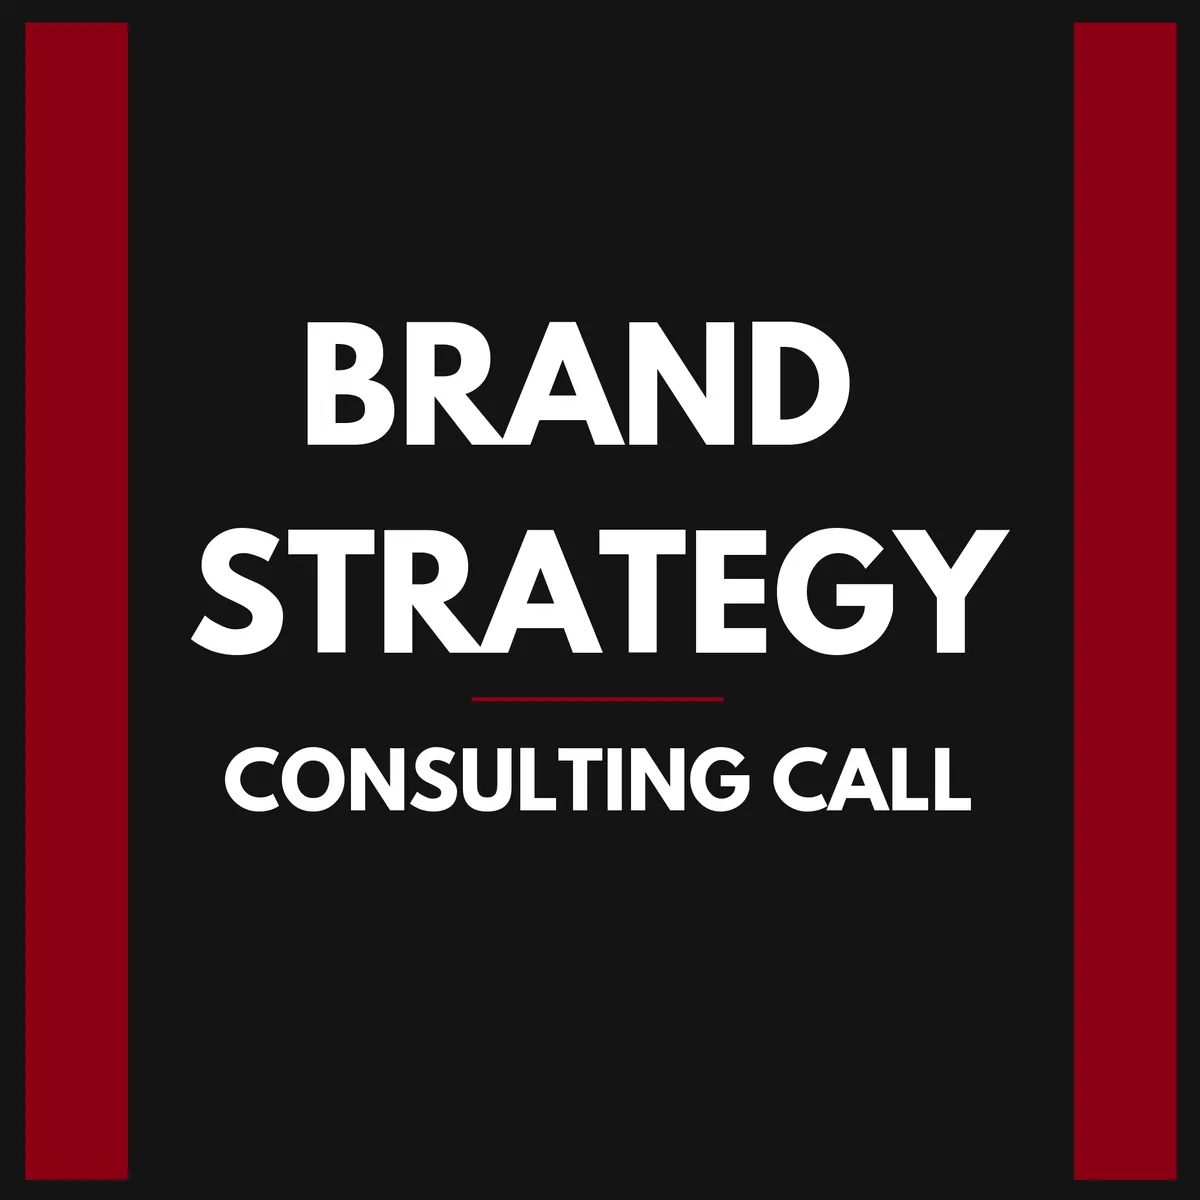  BRAND STRATEGY CONSULTING CALL: 45 MINUTES